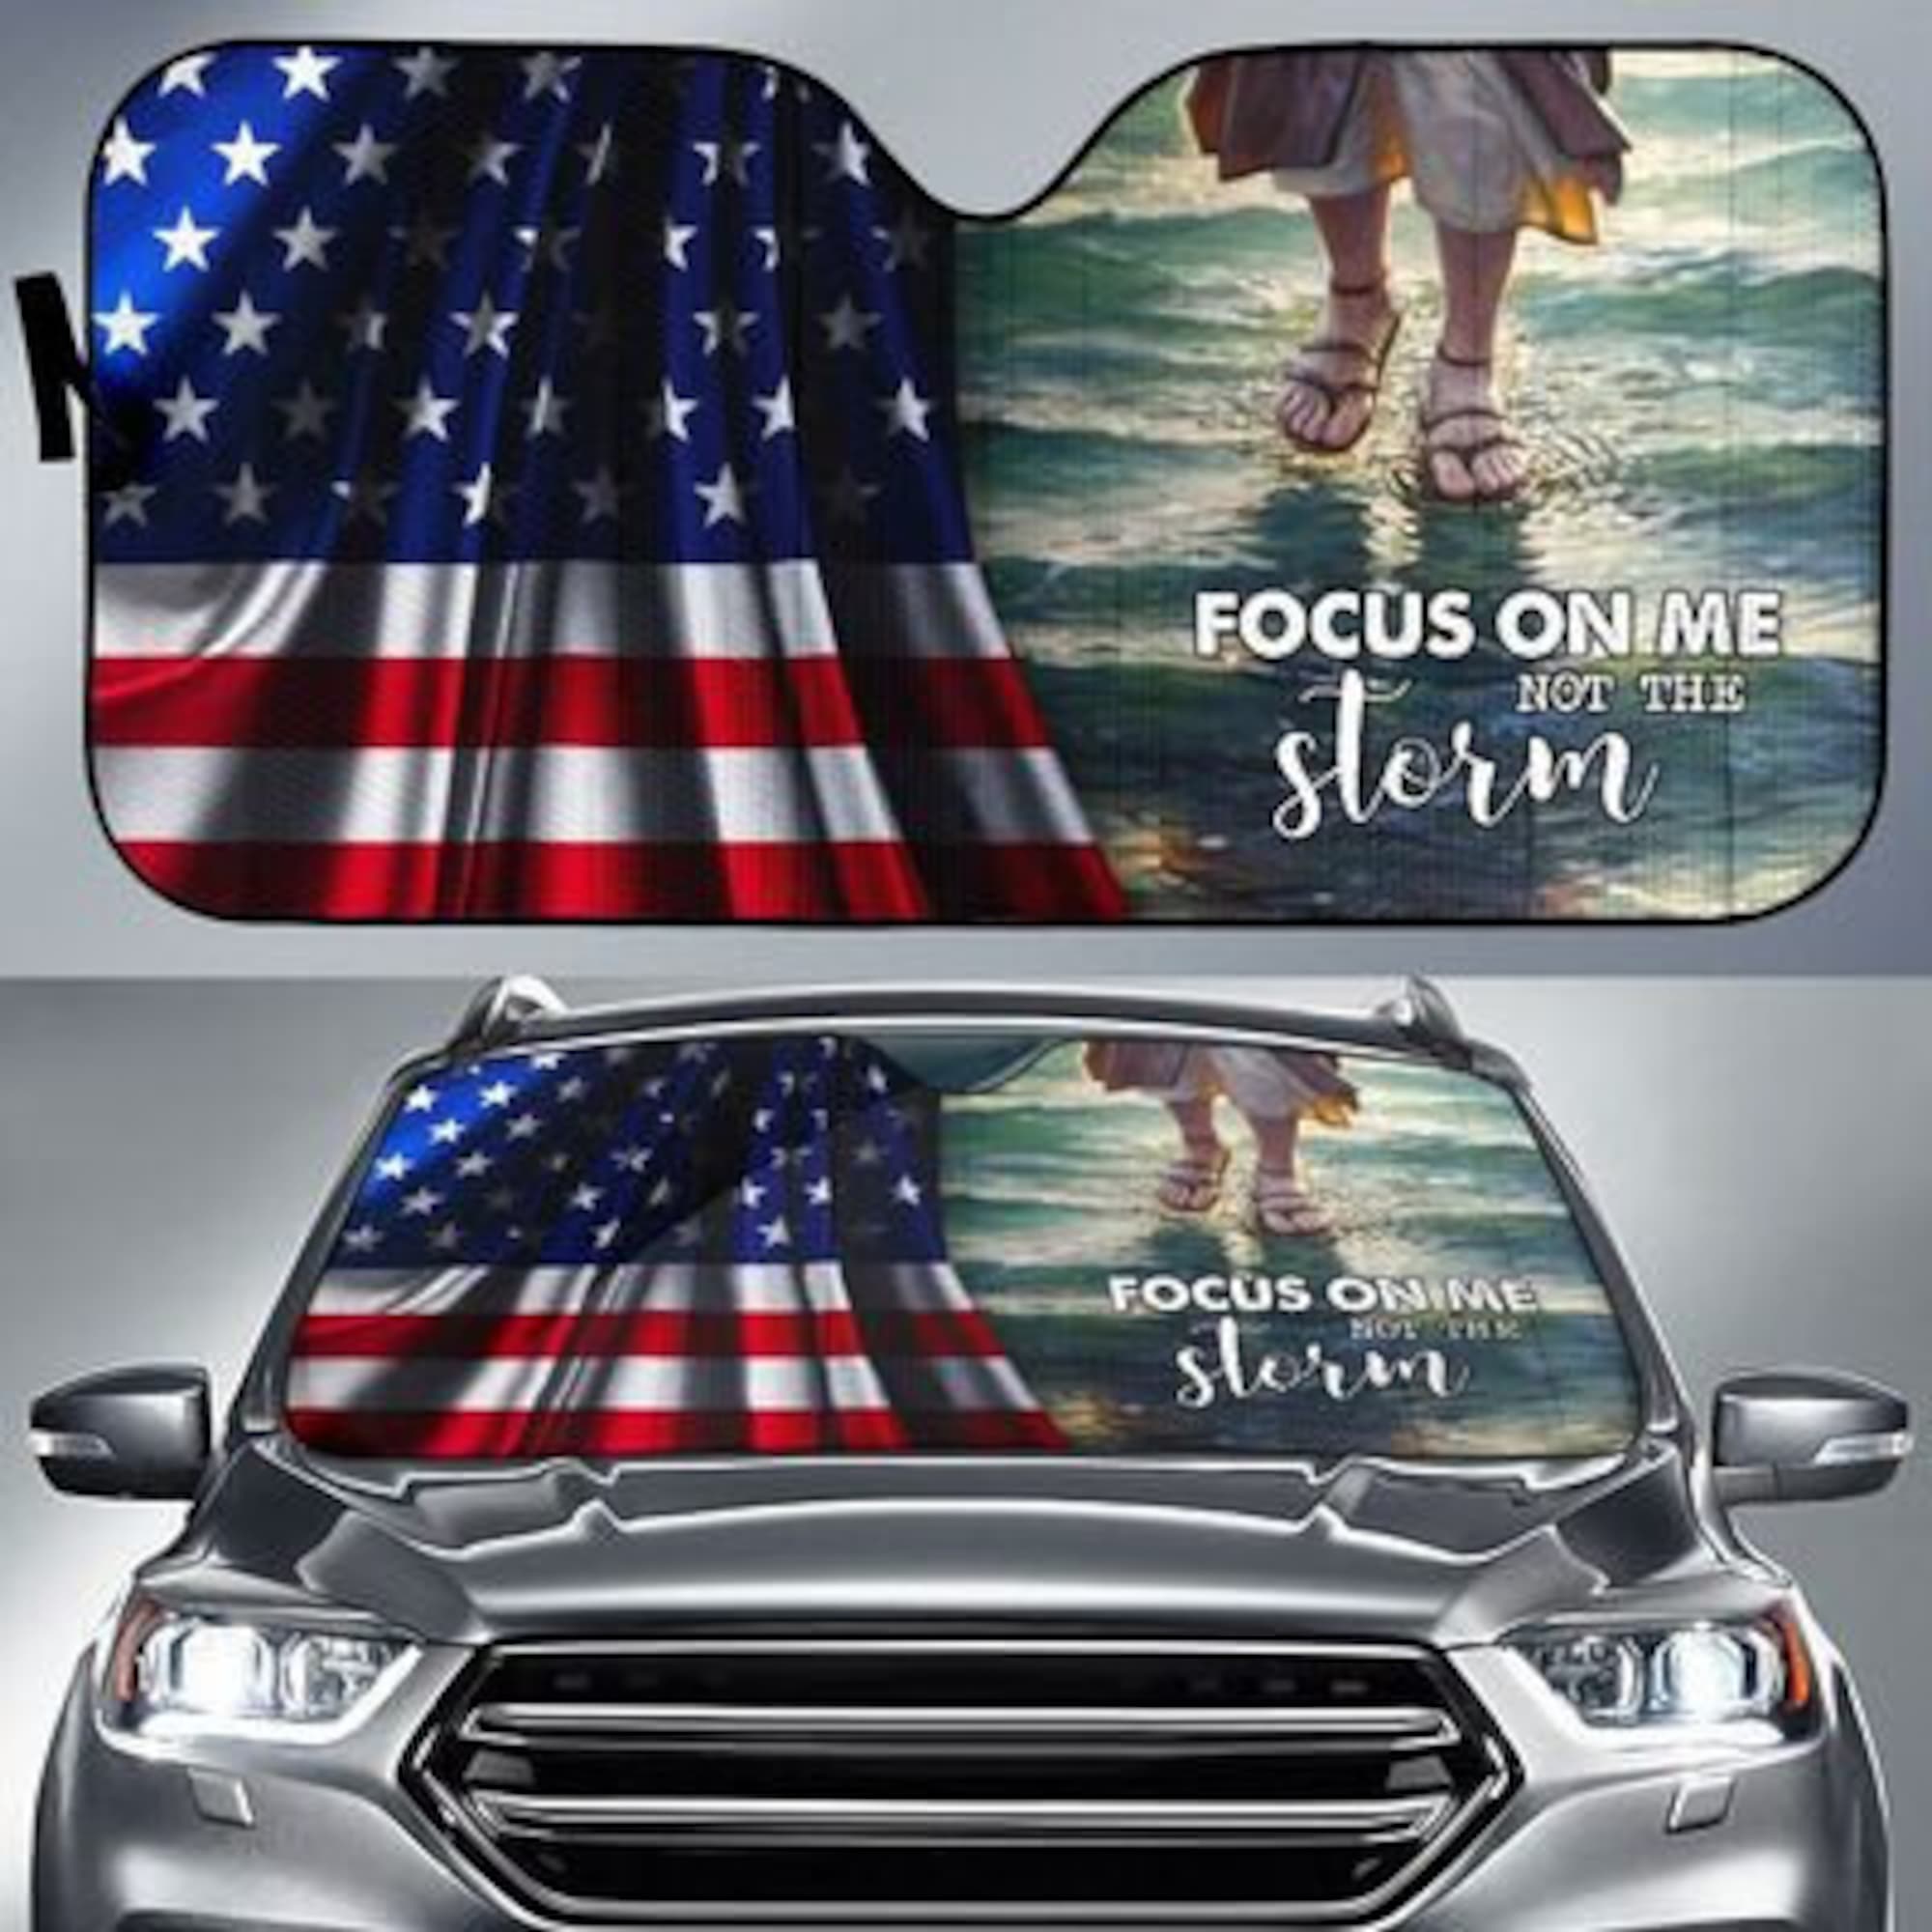 Discover God Focus On Me Not The Storm Auto Sun Shade Car Accessories